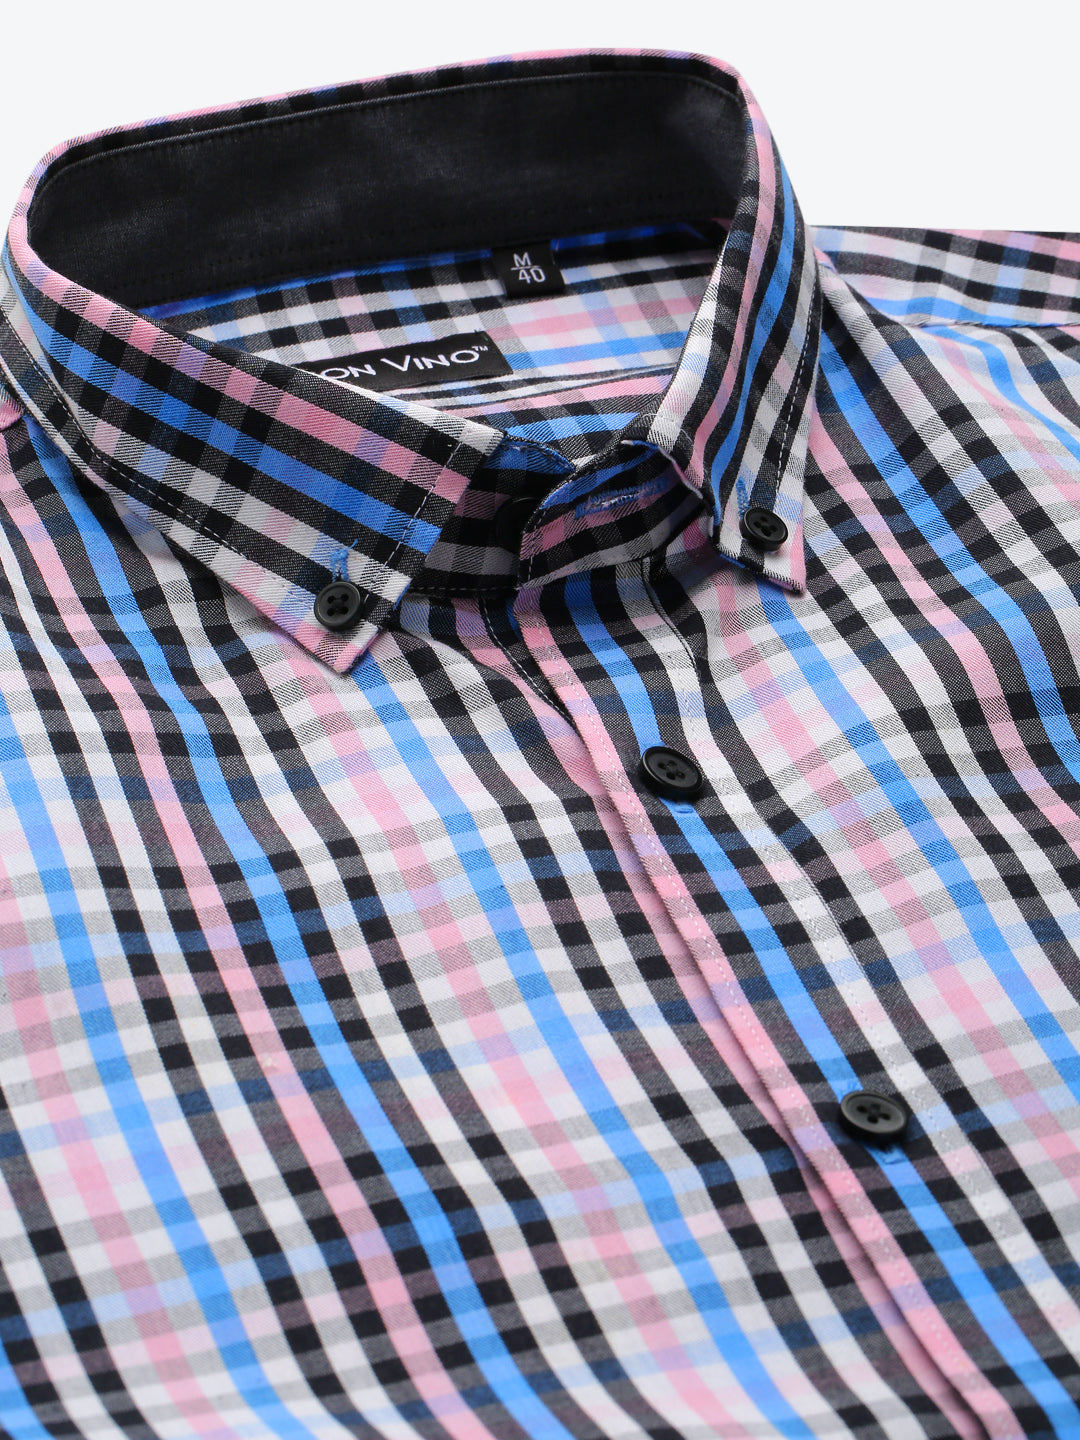 Don Vino Men's Multi Colored Casual Checks Shirt with Full Sleeves